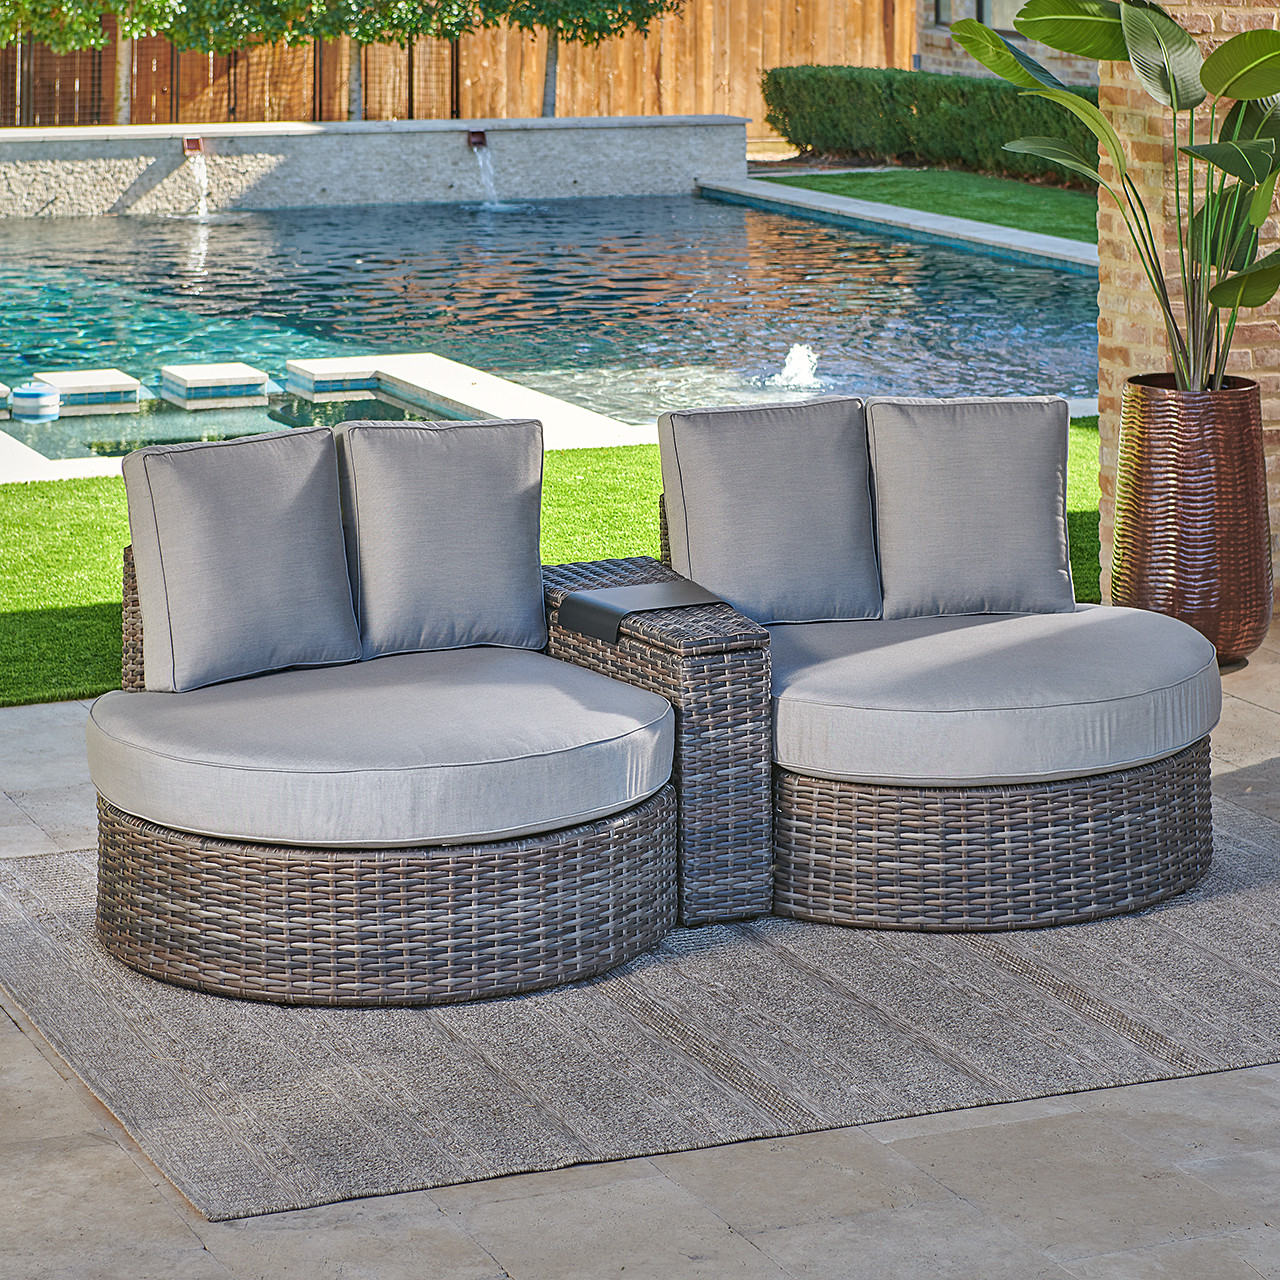 San Lucas Outdoor Wicker with Cushions 3 Piece Cuddle Beds Contour Sectional